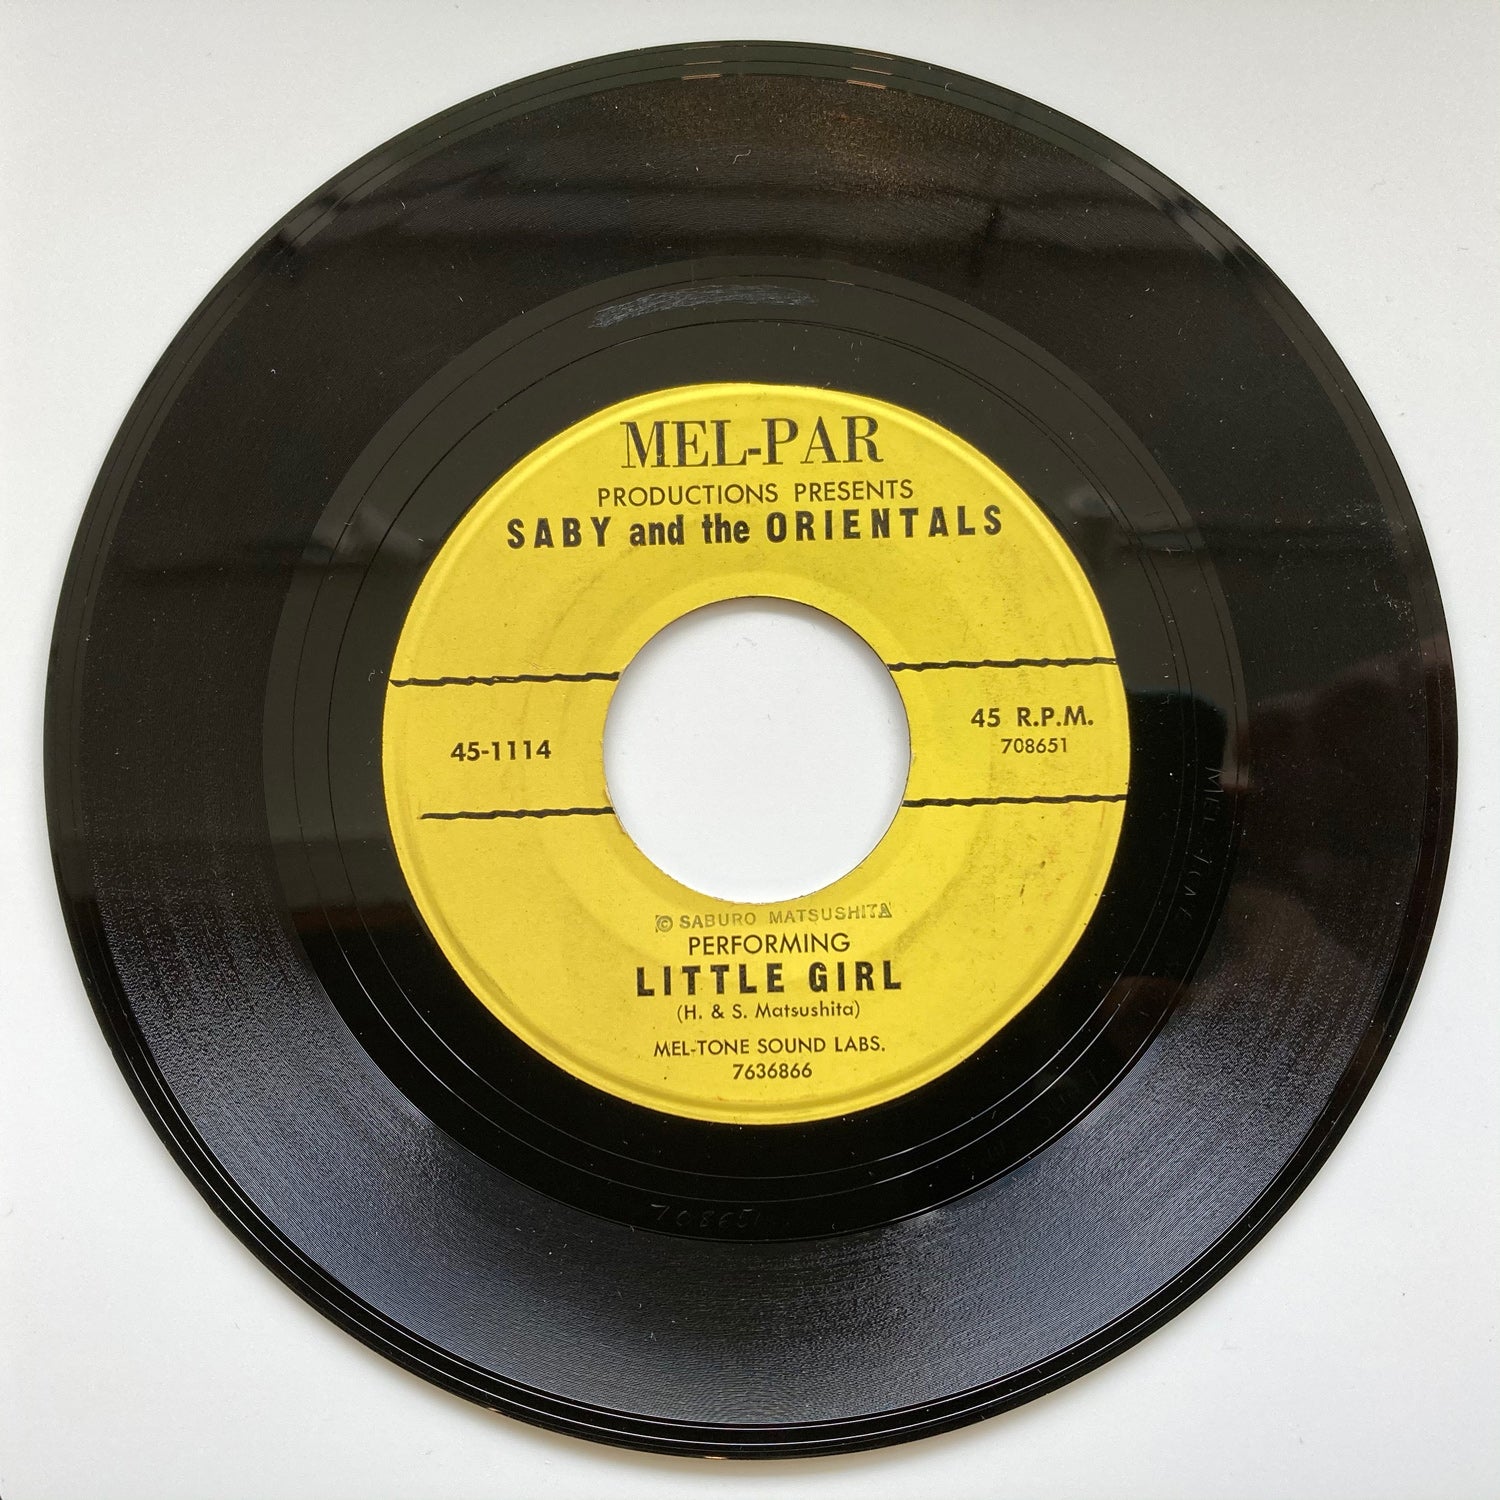 Saby and the Orientals - Little Girl (7")